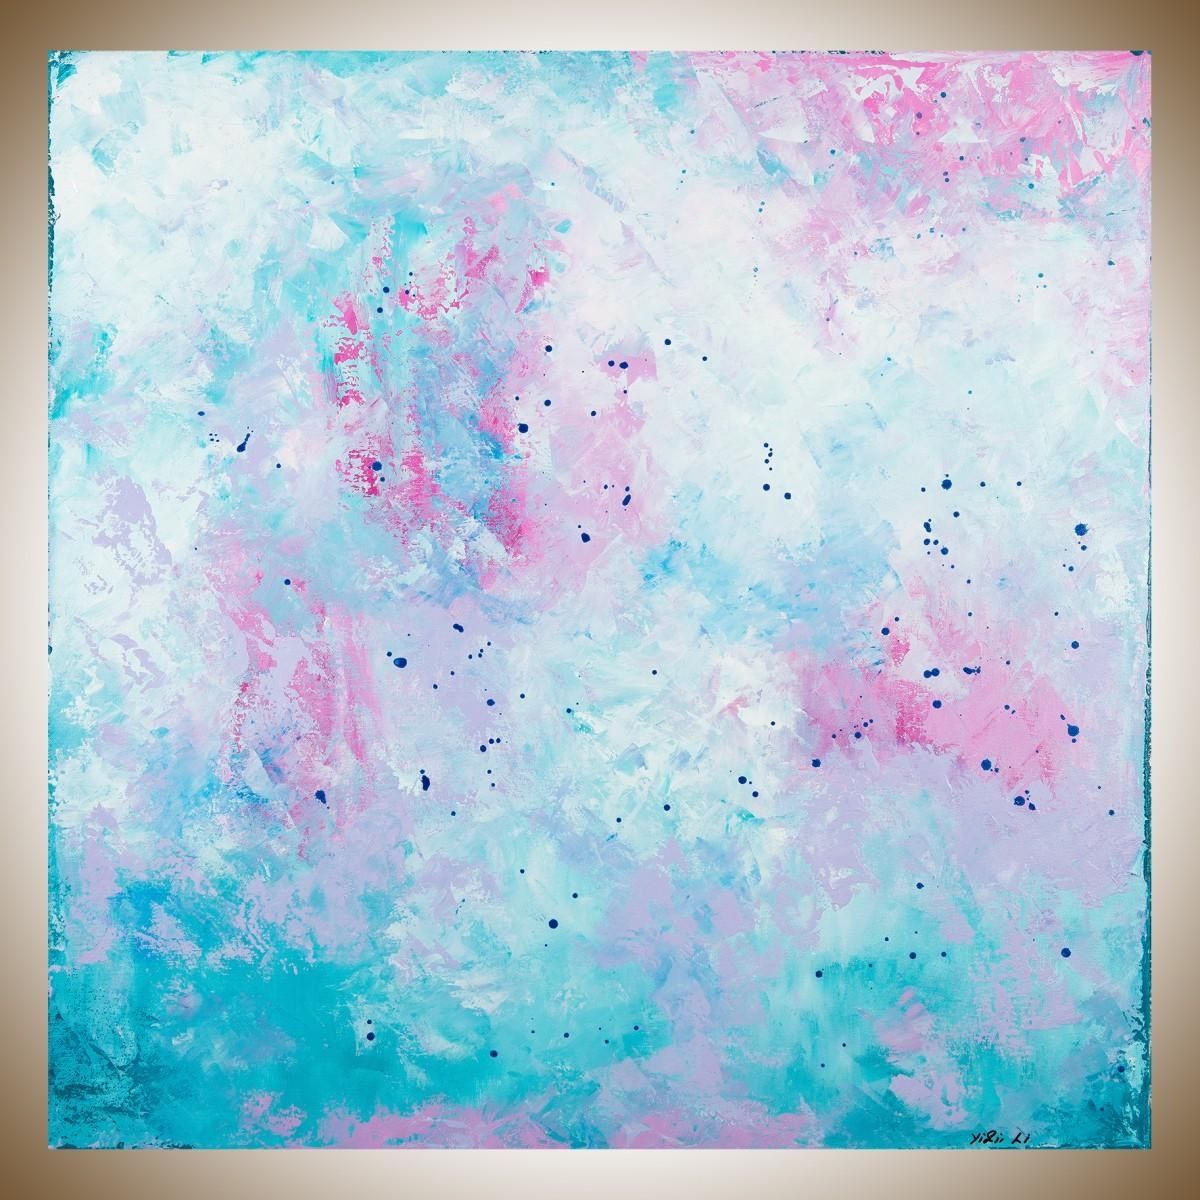 Brilliant Skyqiqigallery 30"x30" Abstract Painting Original Throughout Pink And White Wall Art (View 5 of 20)